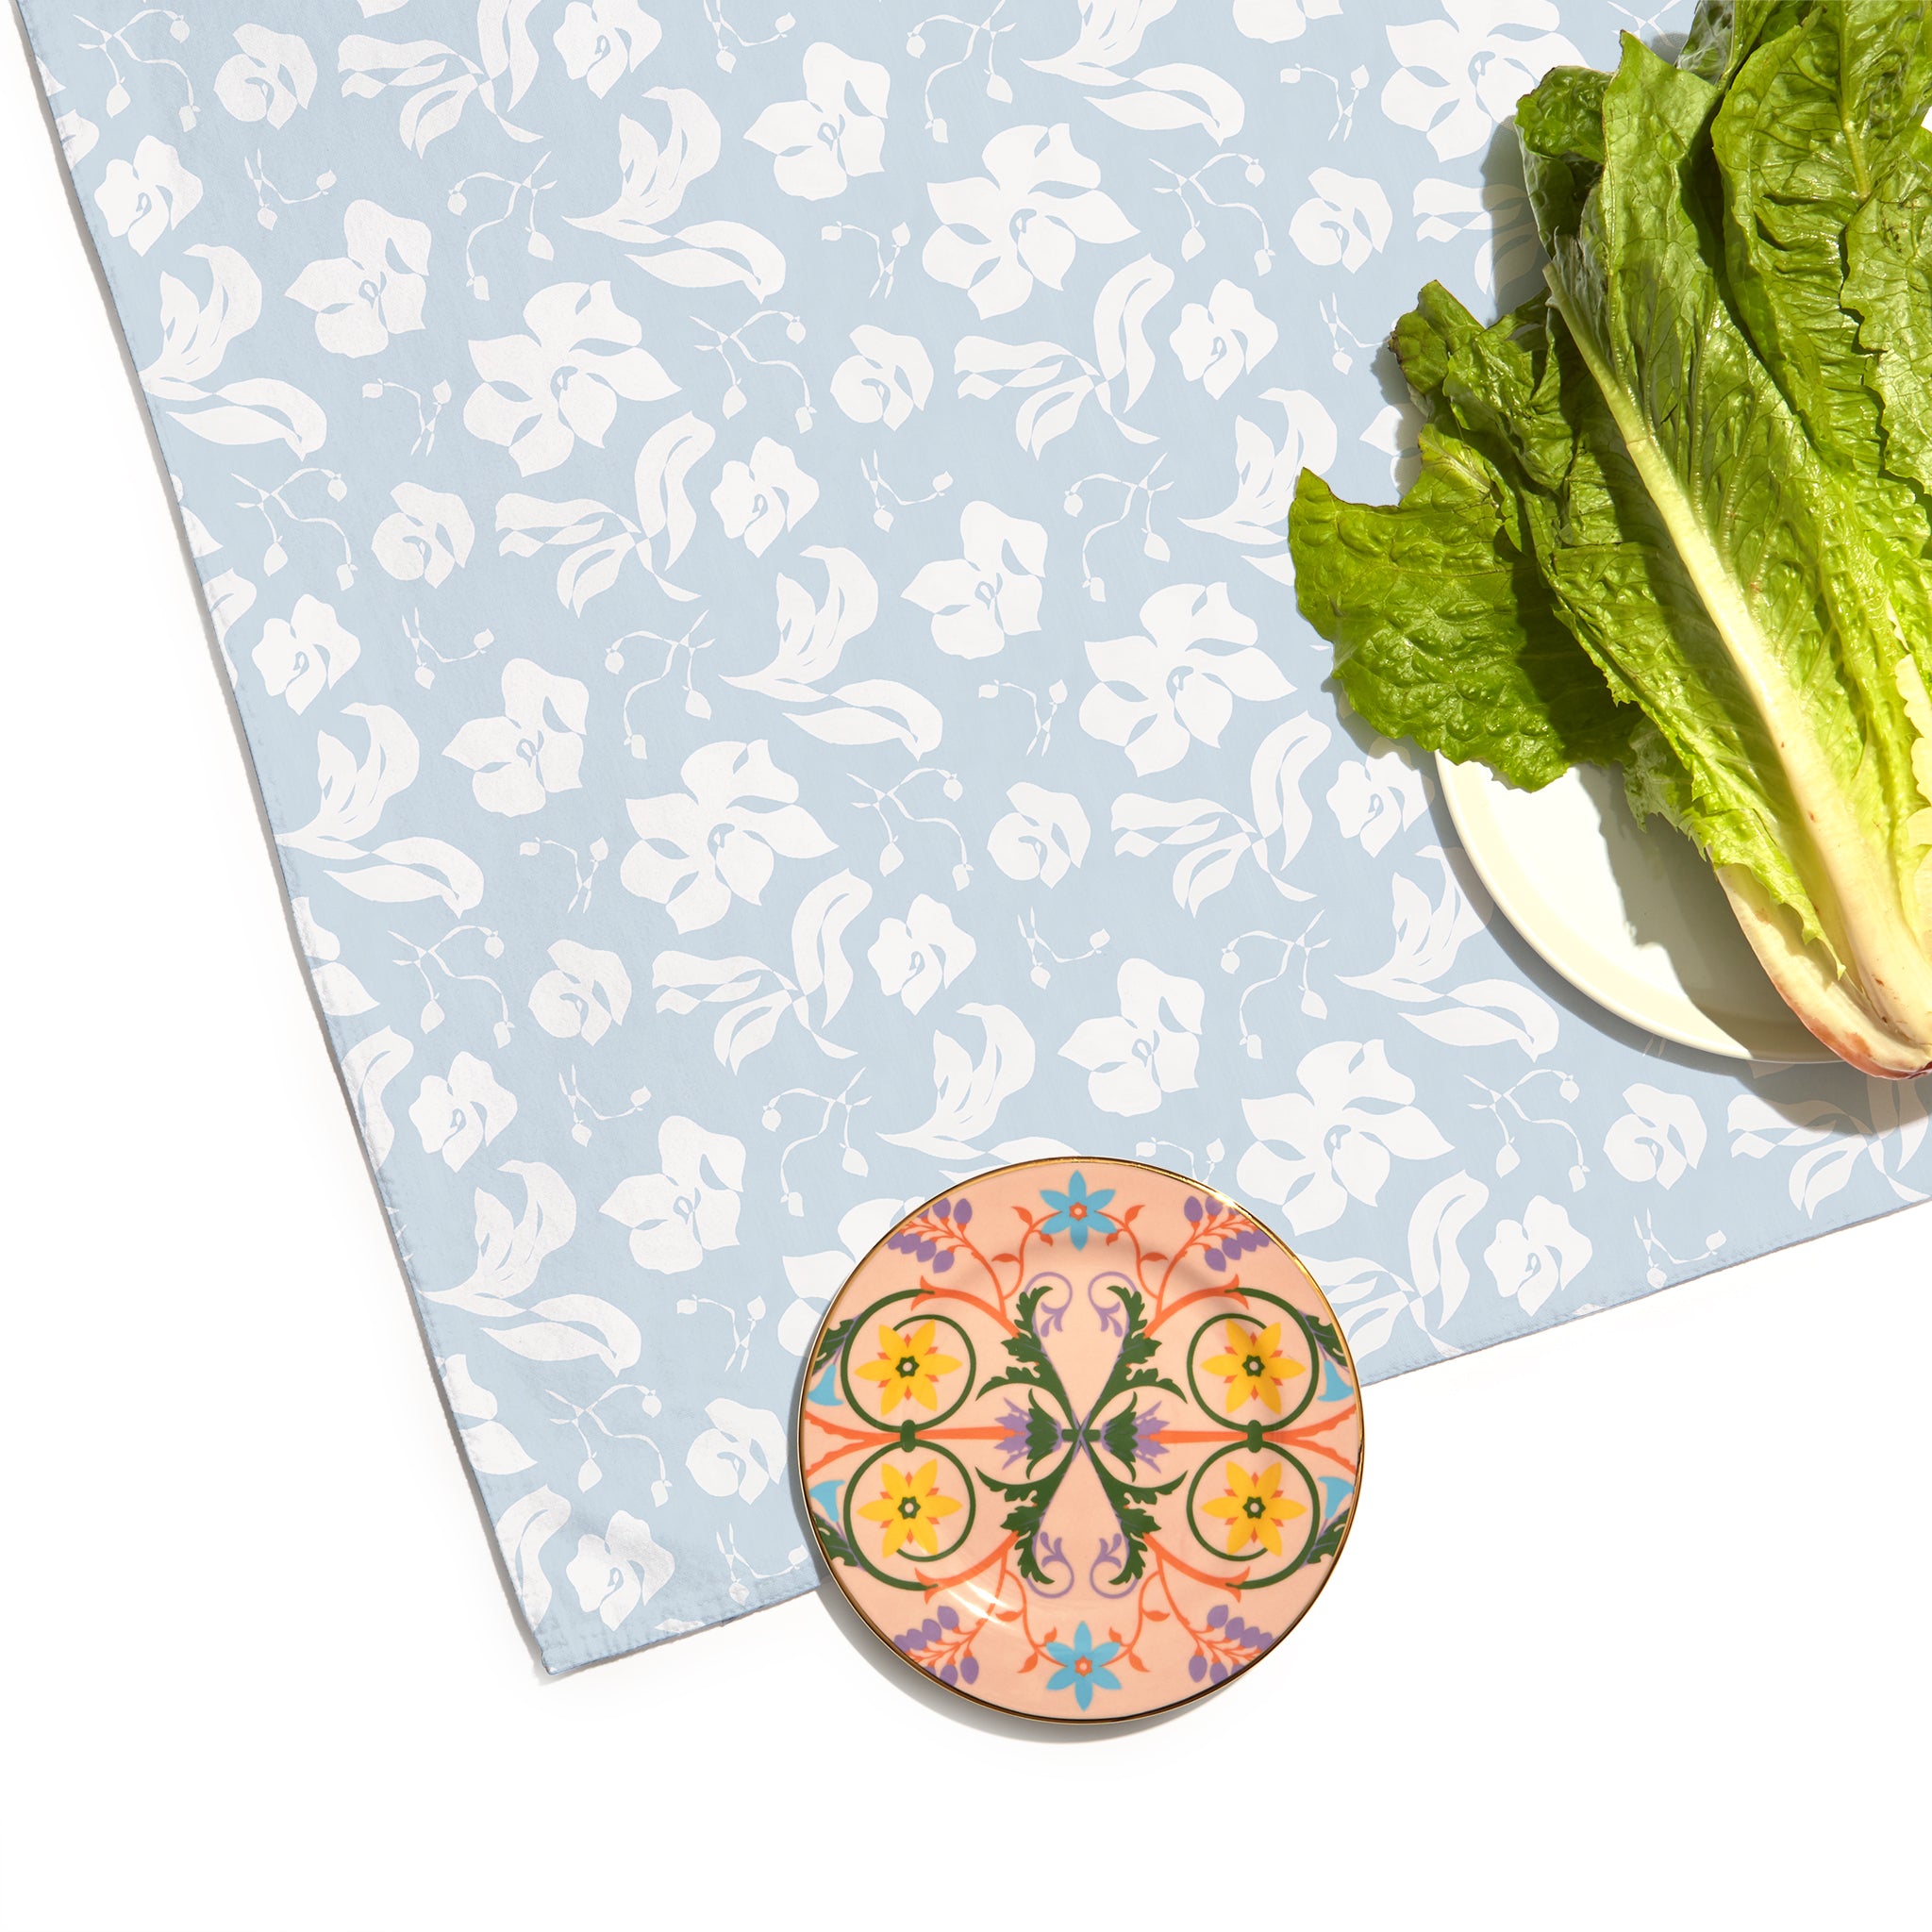 Corner Close-Up of Cornflower Blue Floral Custom Tablecloth with a colorful geometric shape printed plate and a white plate with lettuce on top